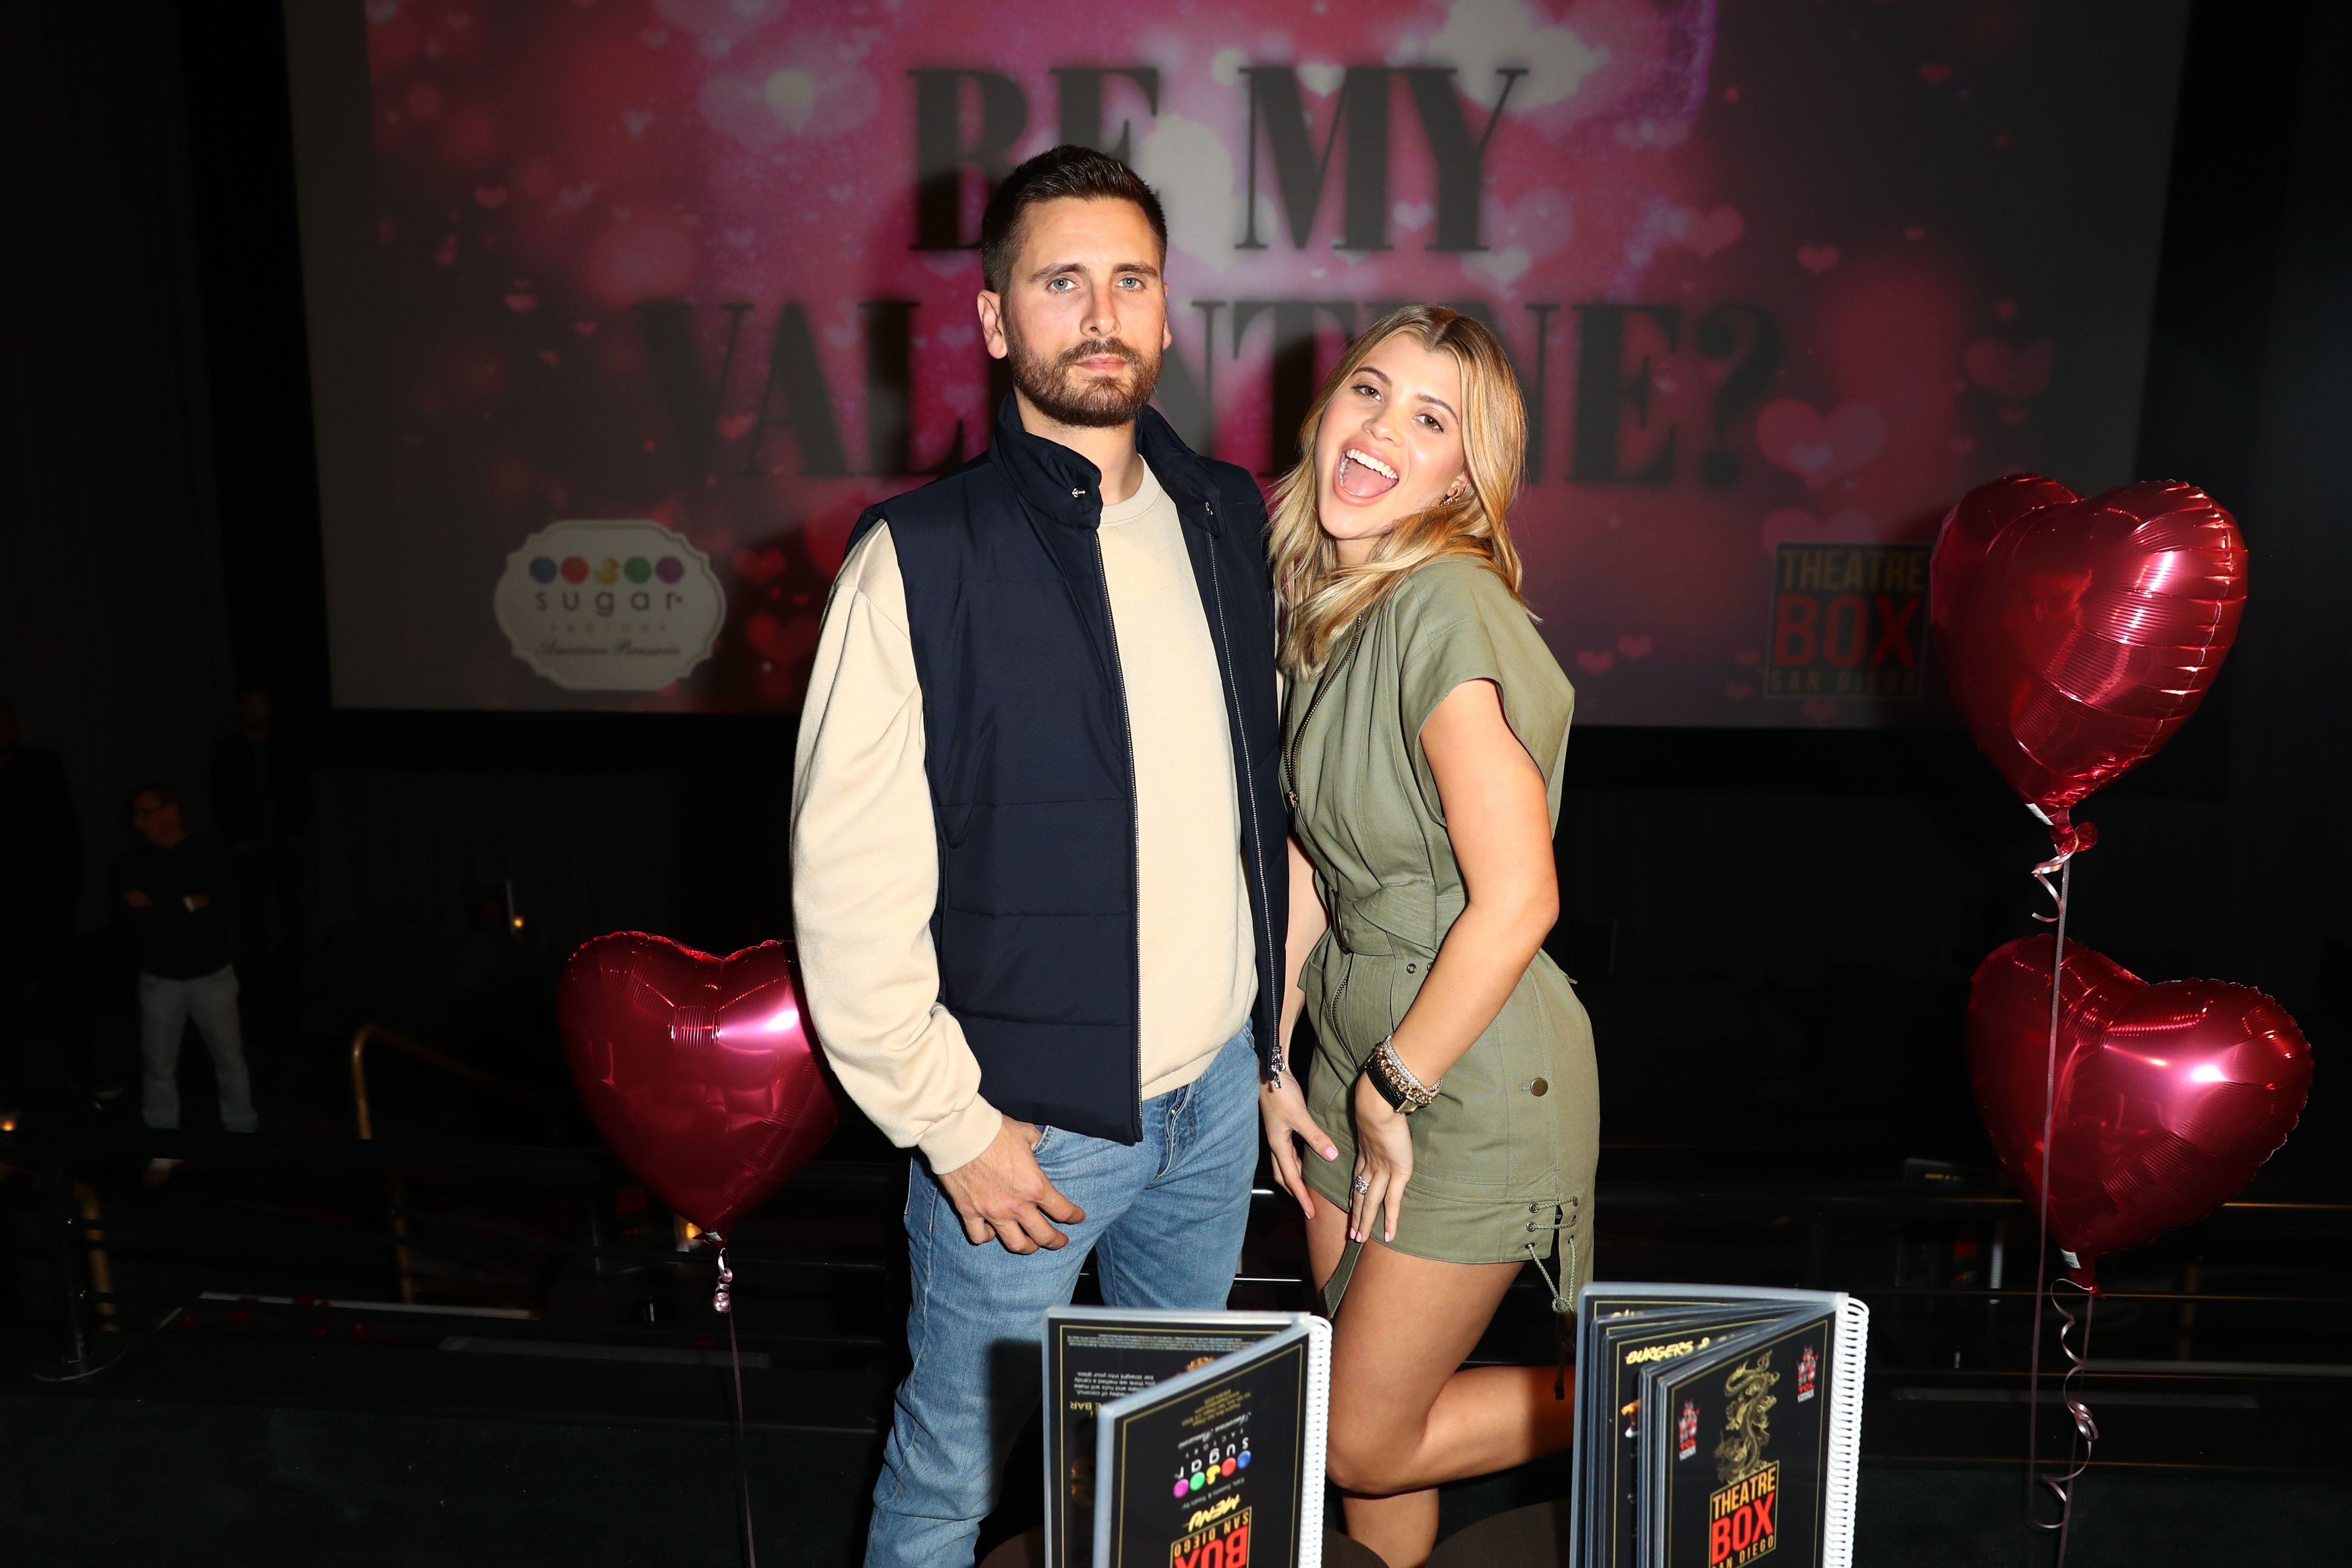 Scott Disick and Sofia Richie celebrate Valentine's Day at the Theatre Box® Entertainment Complex on February 14, 2019, in San Diego, California | Photo: Joe Scarnici/Getty Images